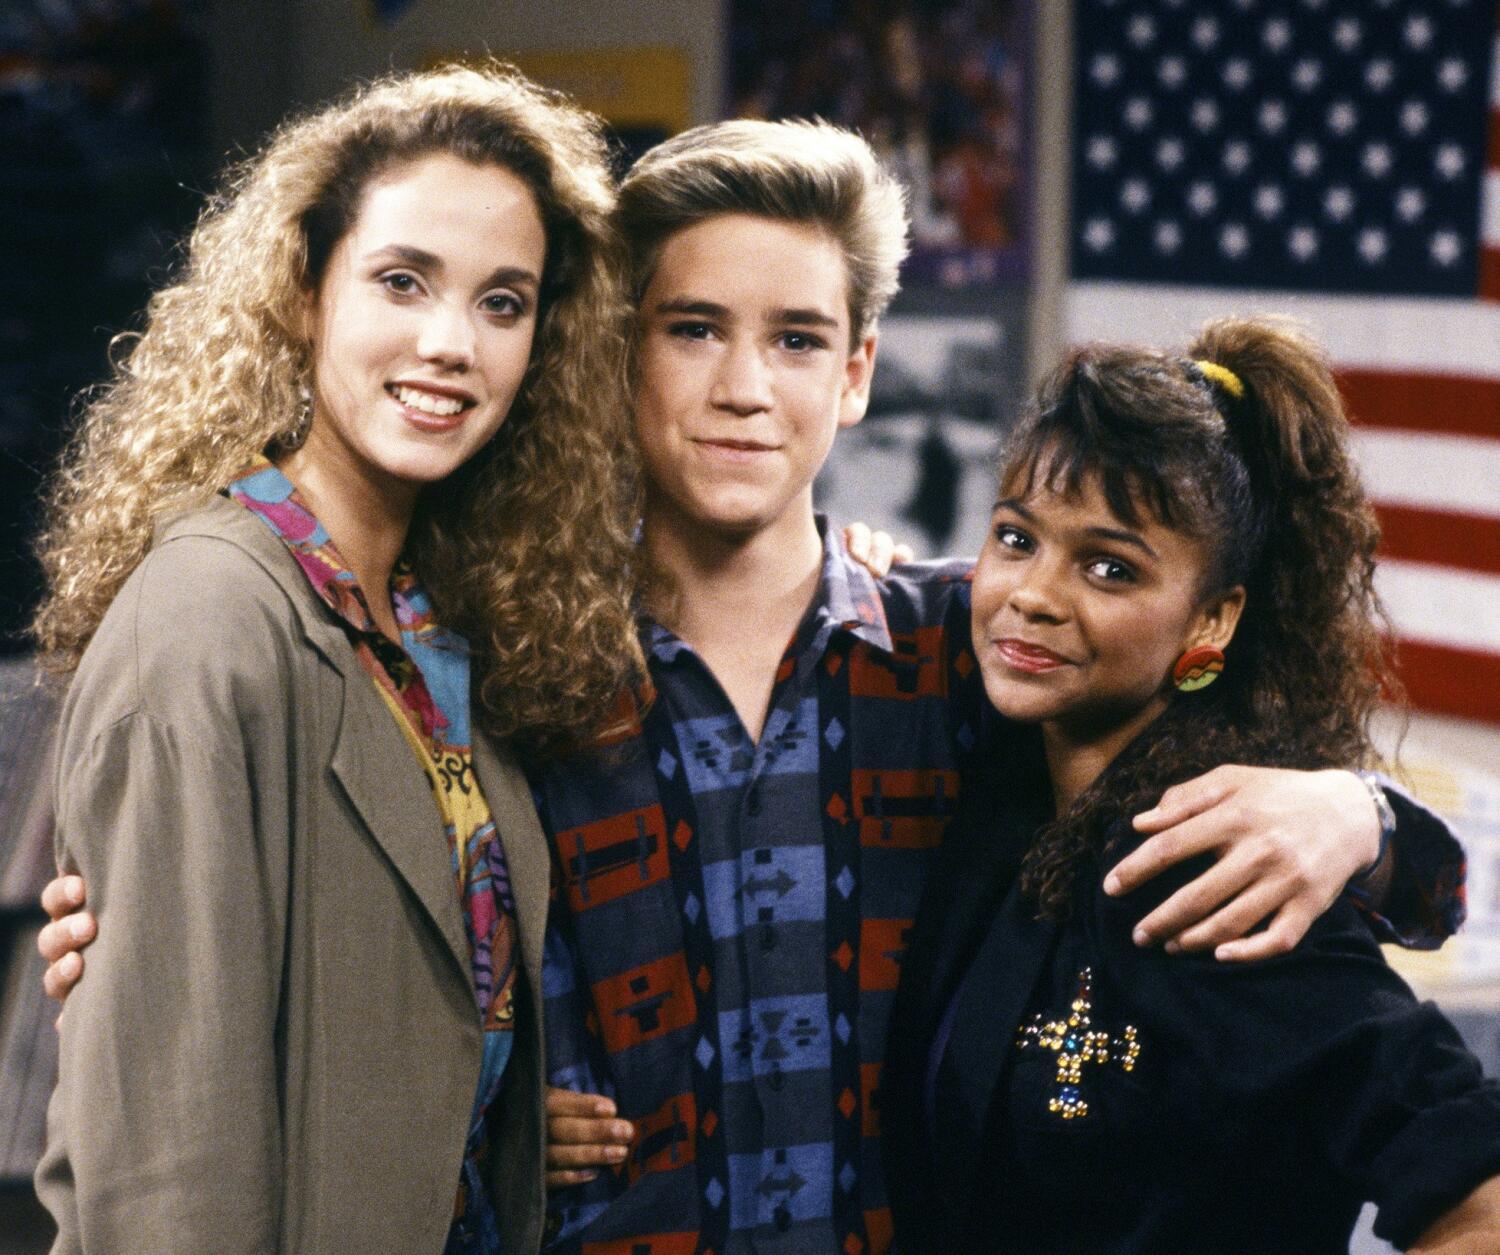 Mark-Paul Gosselaar says rewatching 'Saved by the Bell' is tough; his character Zack Morris was problematic